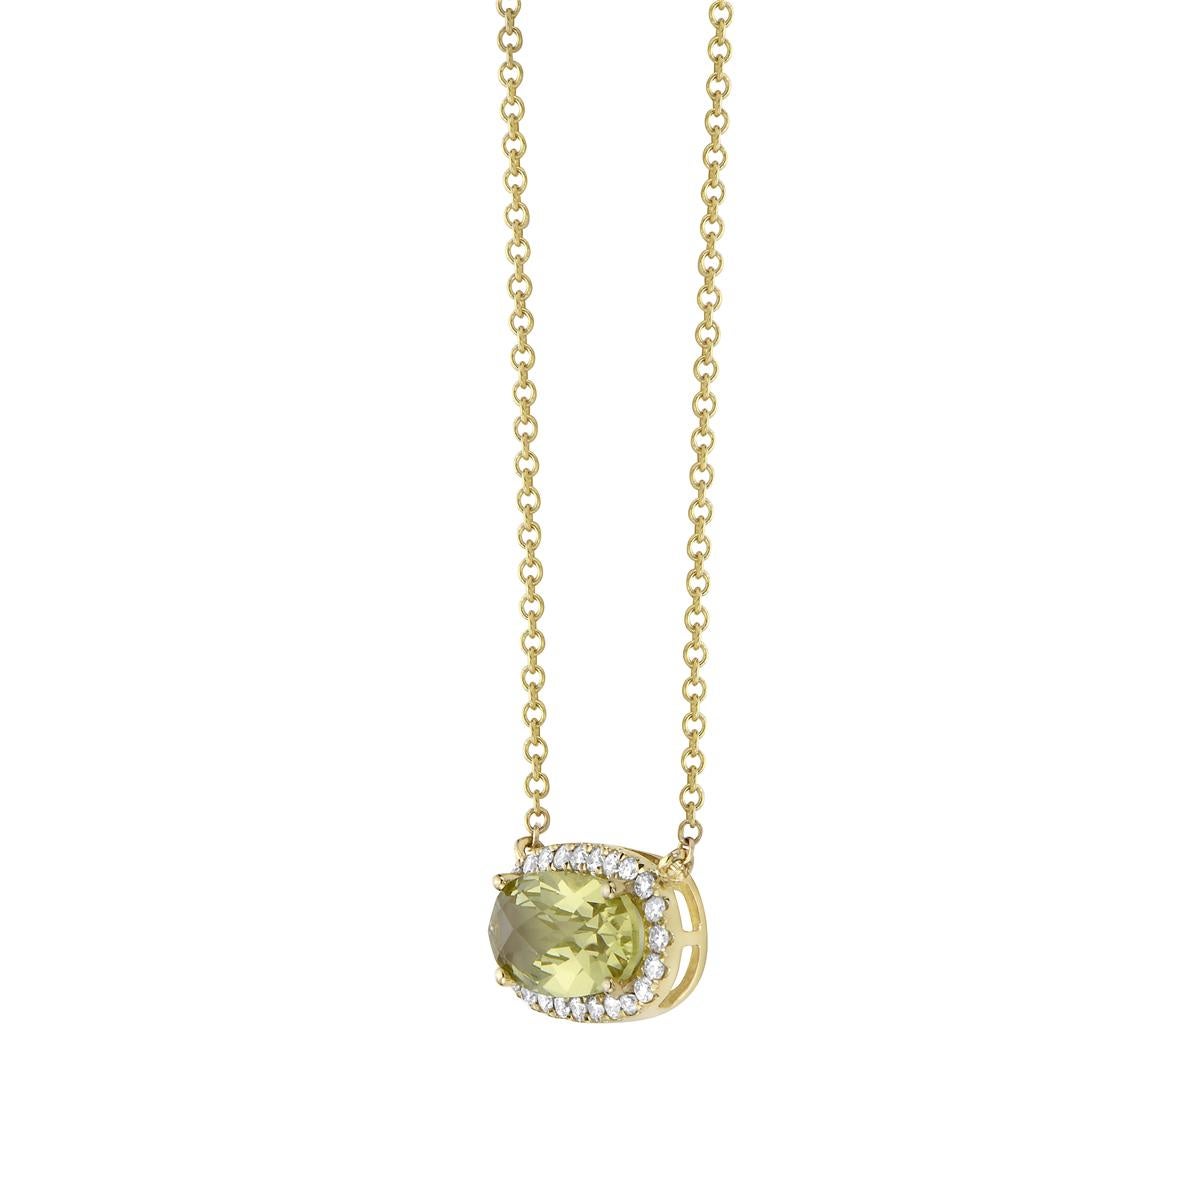 With this exquisite semi-precious yellow-gold gold-green quartz diamond pendant, style and glamour are in the spotlight. This 14-karat oval cut pendant is made from 0.9 grams of gold, 1 gold green quartz totaling 1.69 karats, and is surrounded by 22